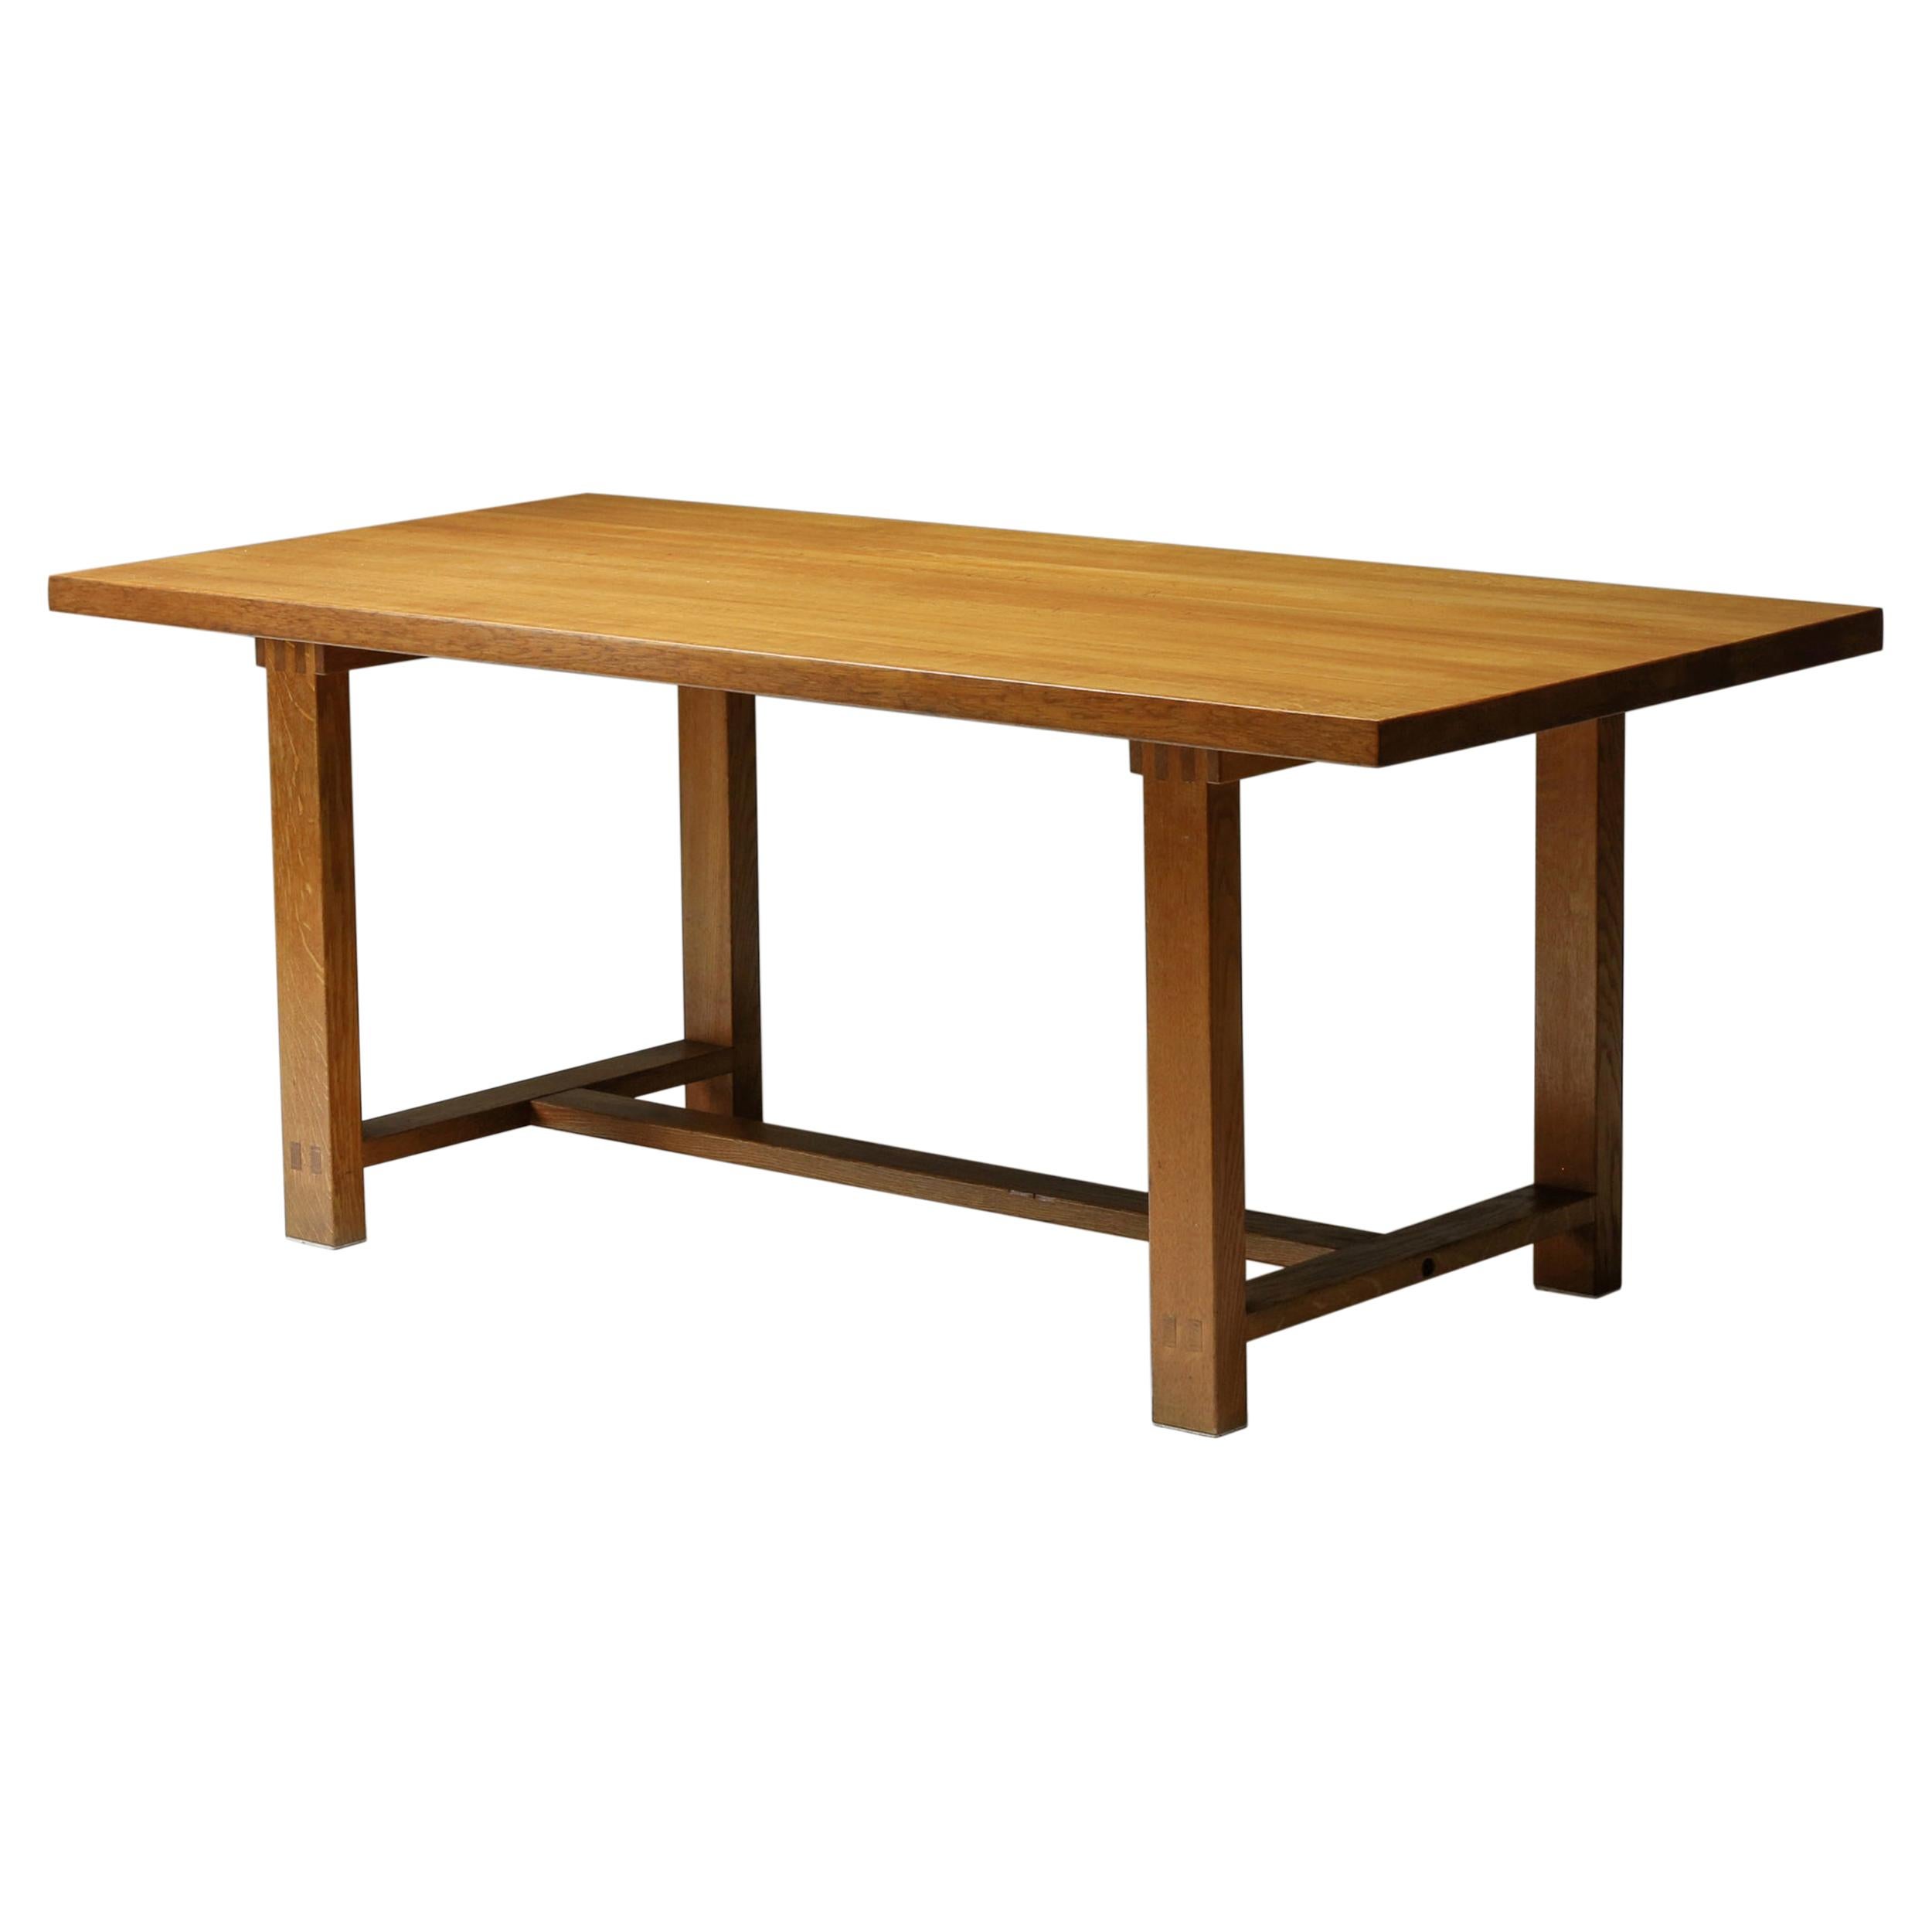 Pierre Chapo Dining Table, French Mid-Century Design, T01D